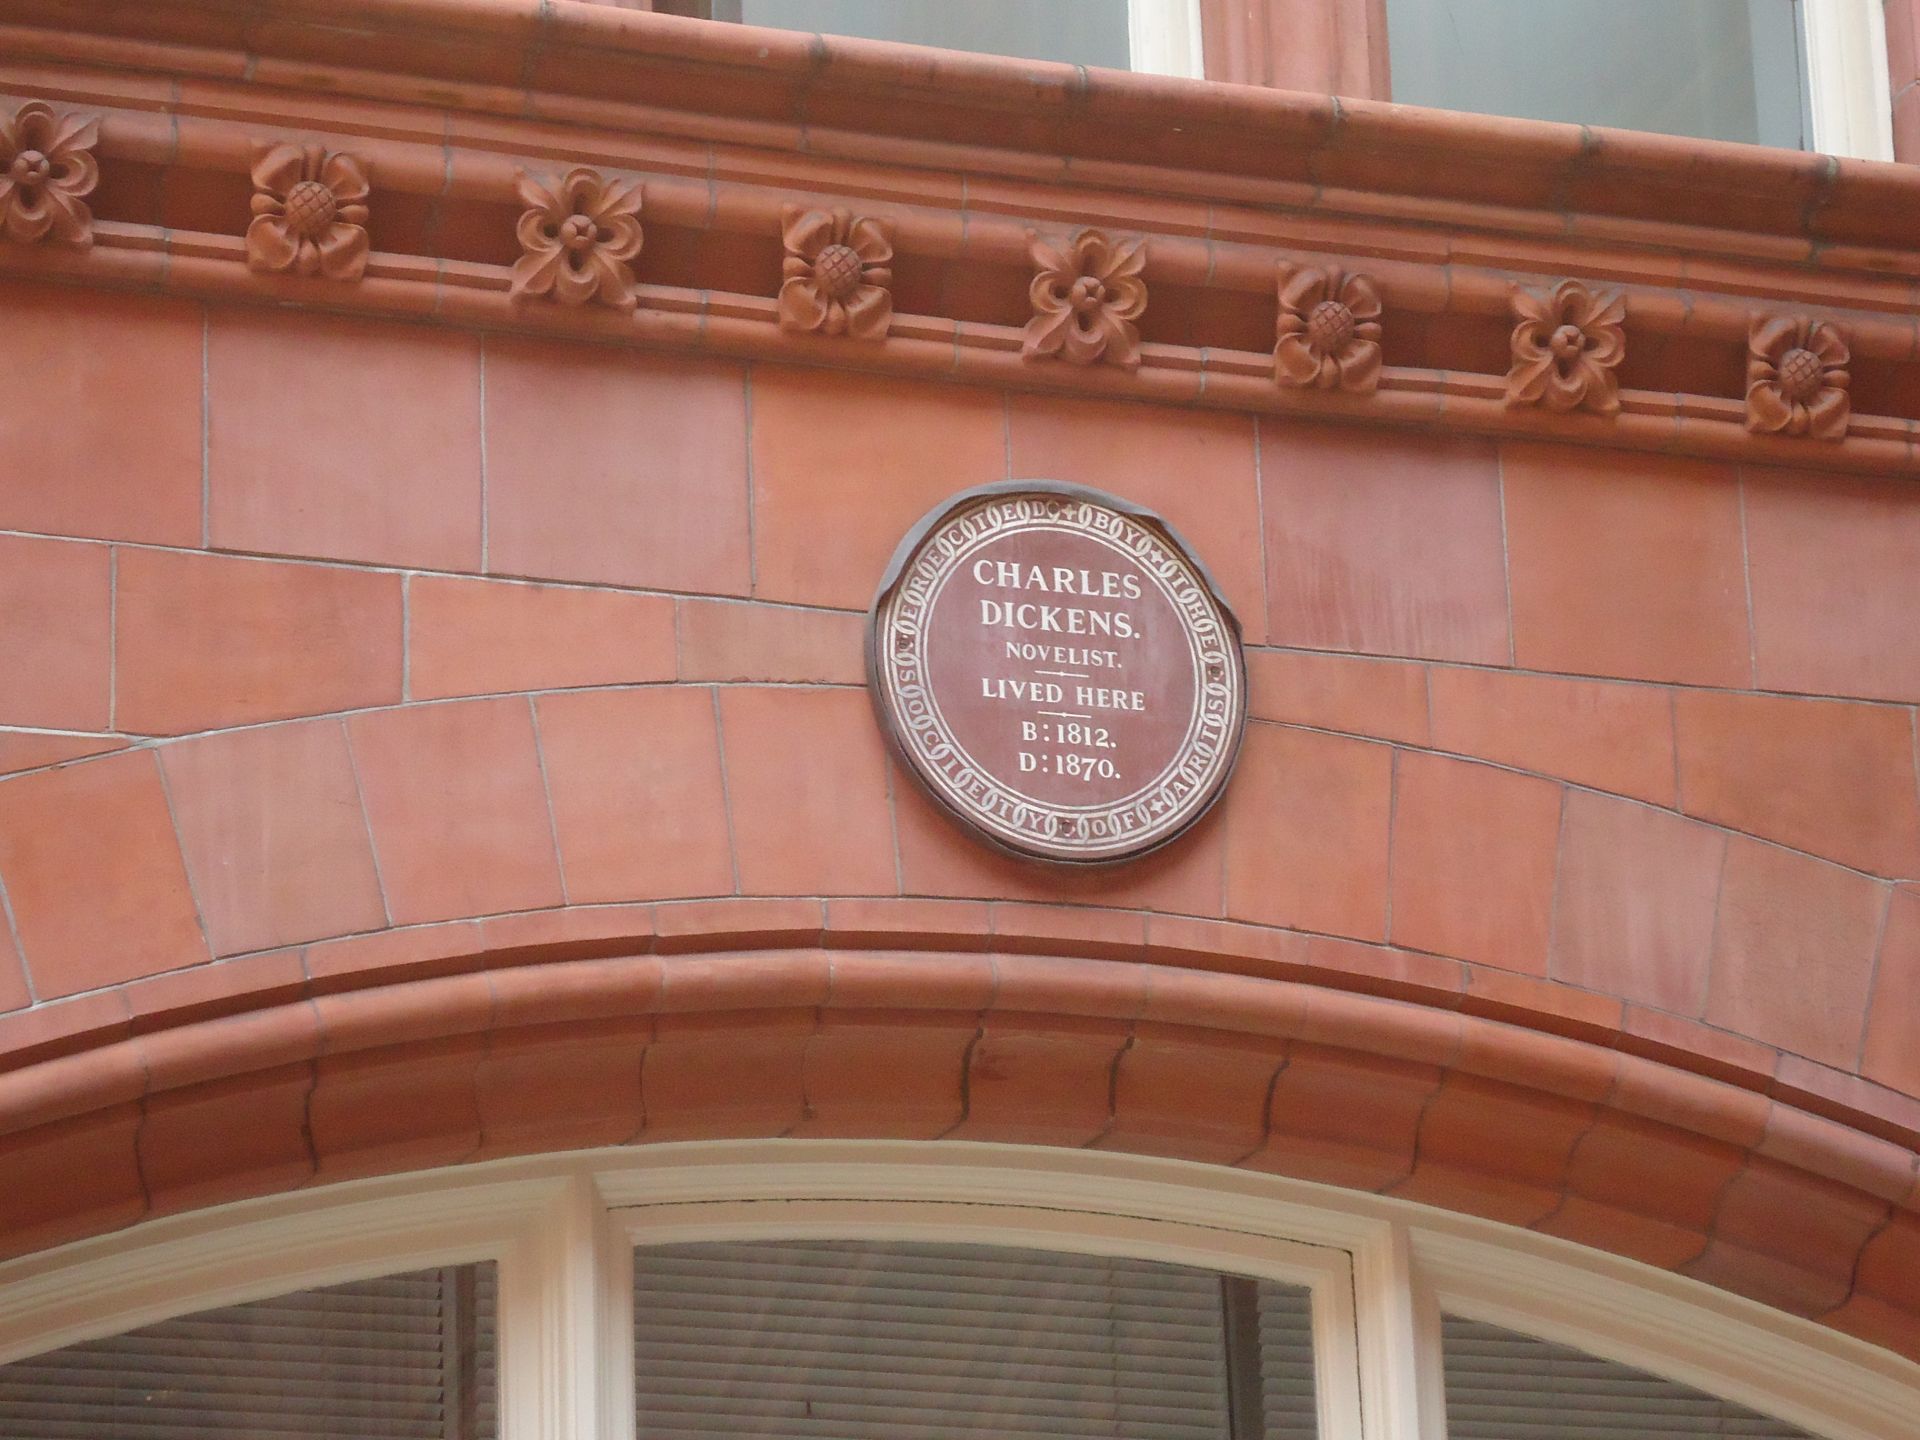 Charles Dickens: Assurance Building plaque for Dickens erected by the Royal Society of Arts. Photo Credit: ©Mark King.